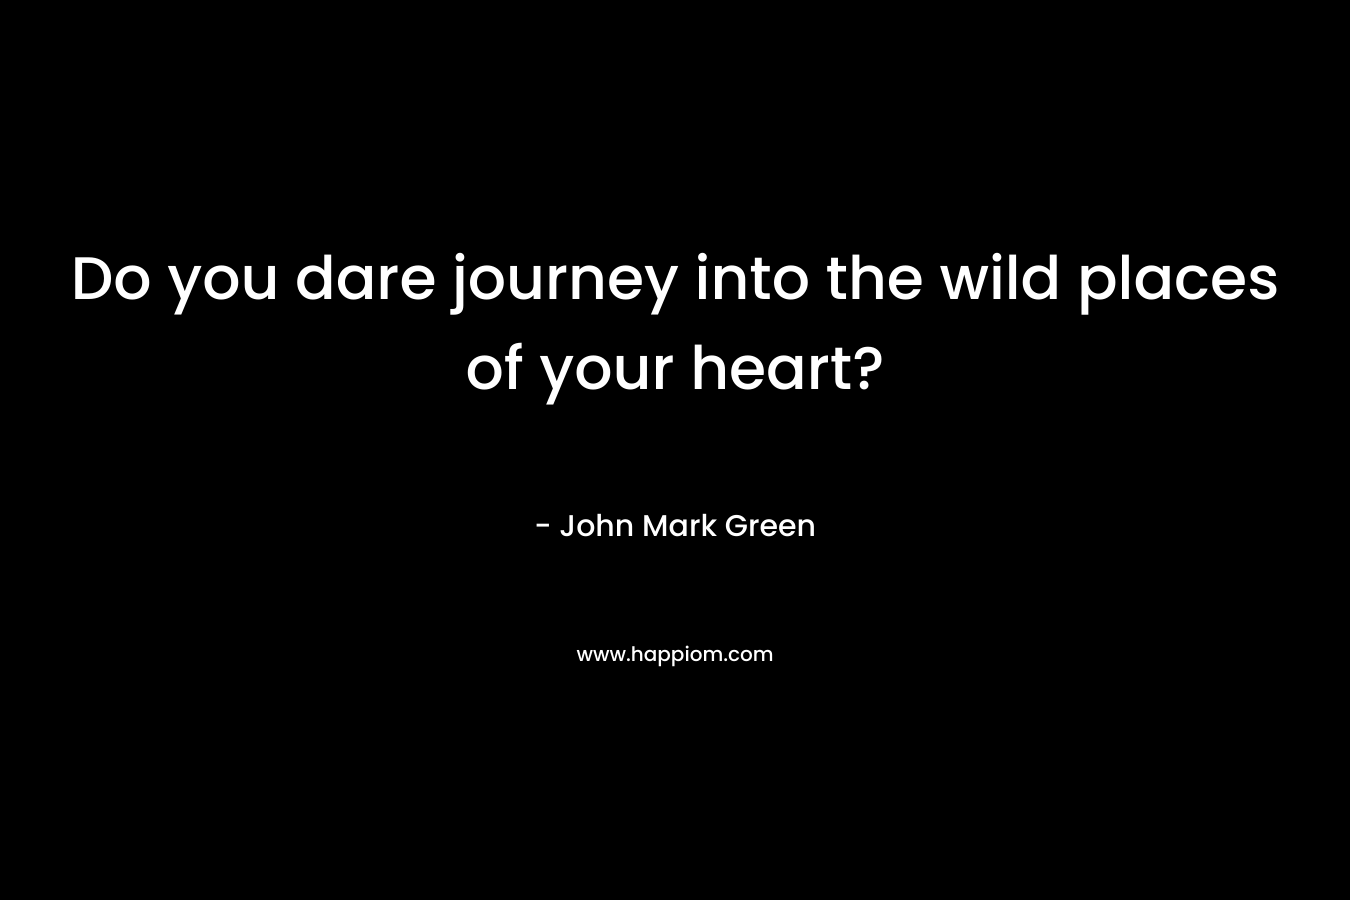 Do you dare journey into the wild places of your heart?